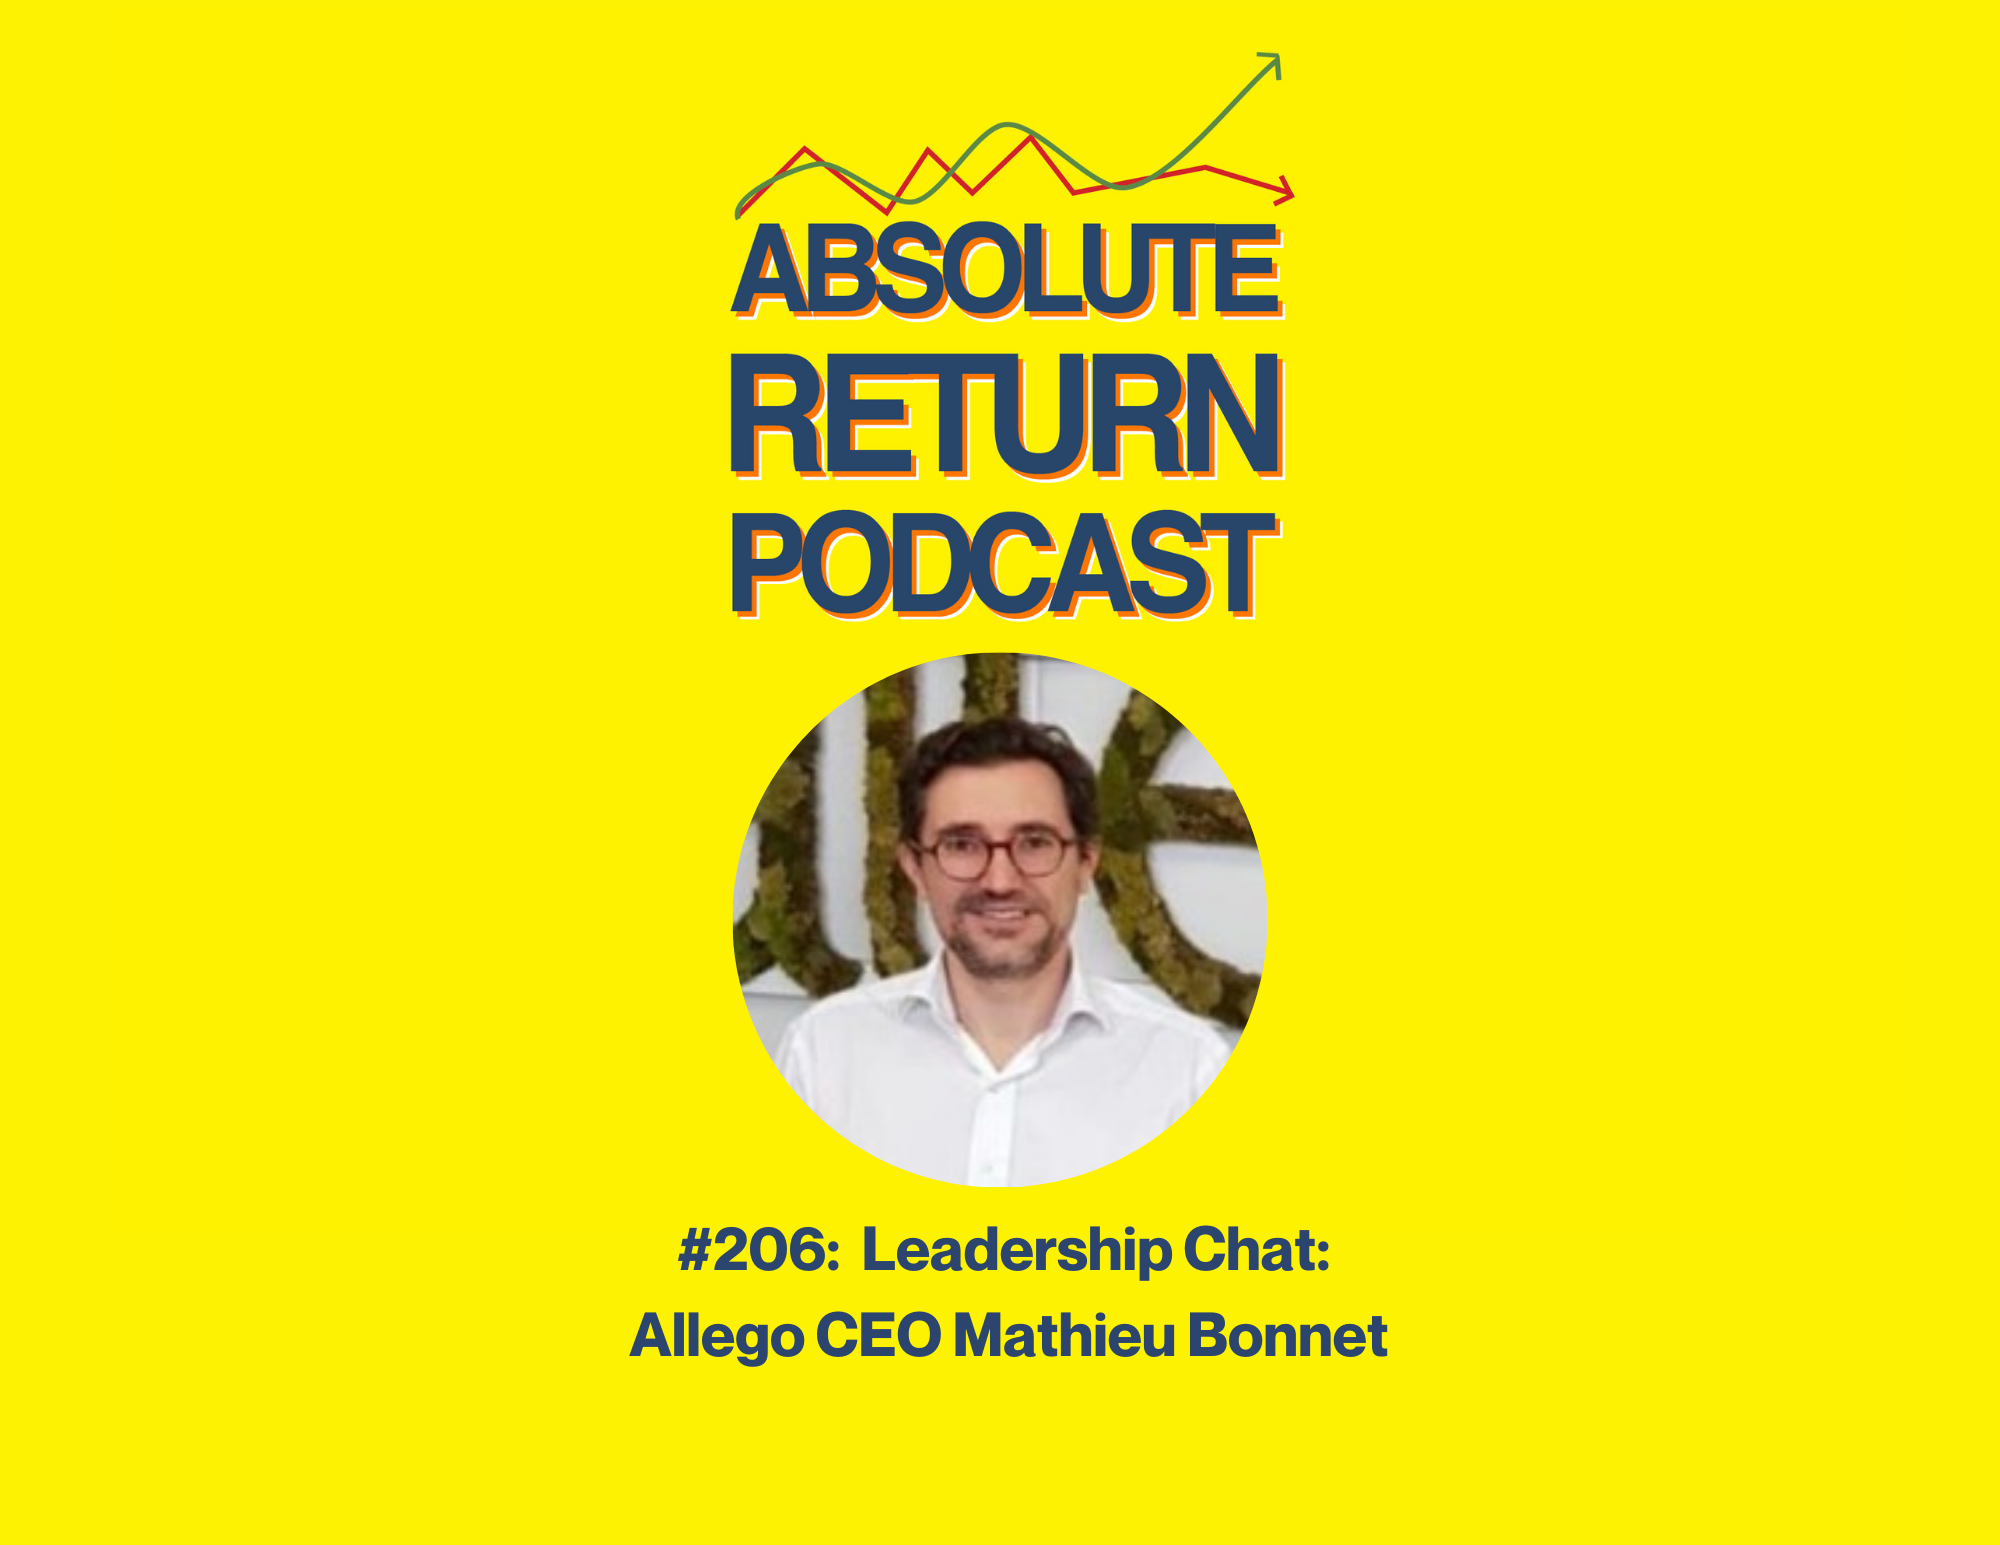 Absolute Return Podcast #206: Leadership Chat: Allego CEO Mathieu Bonnet